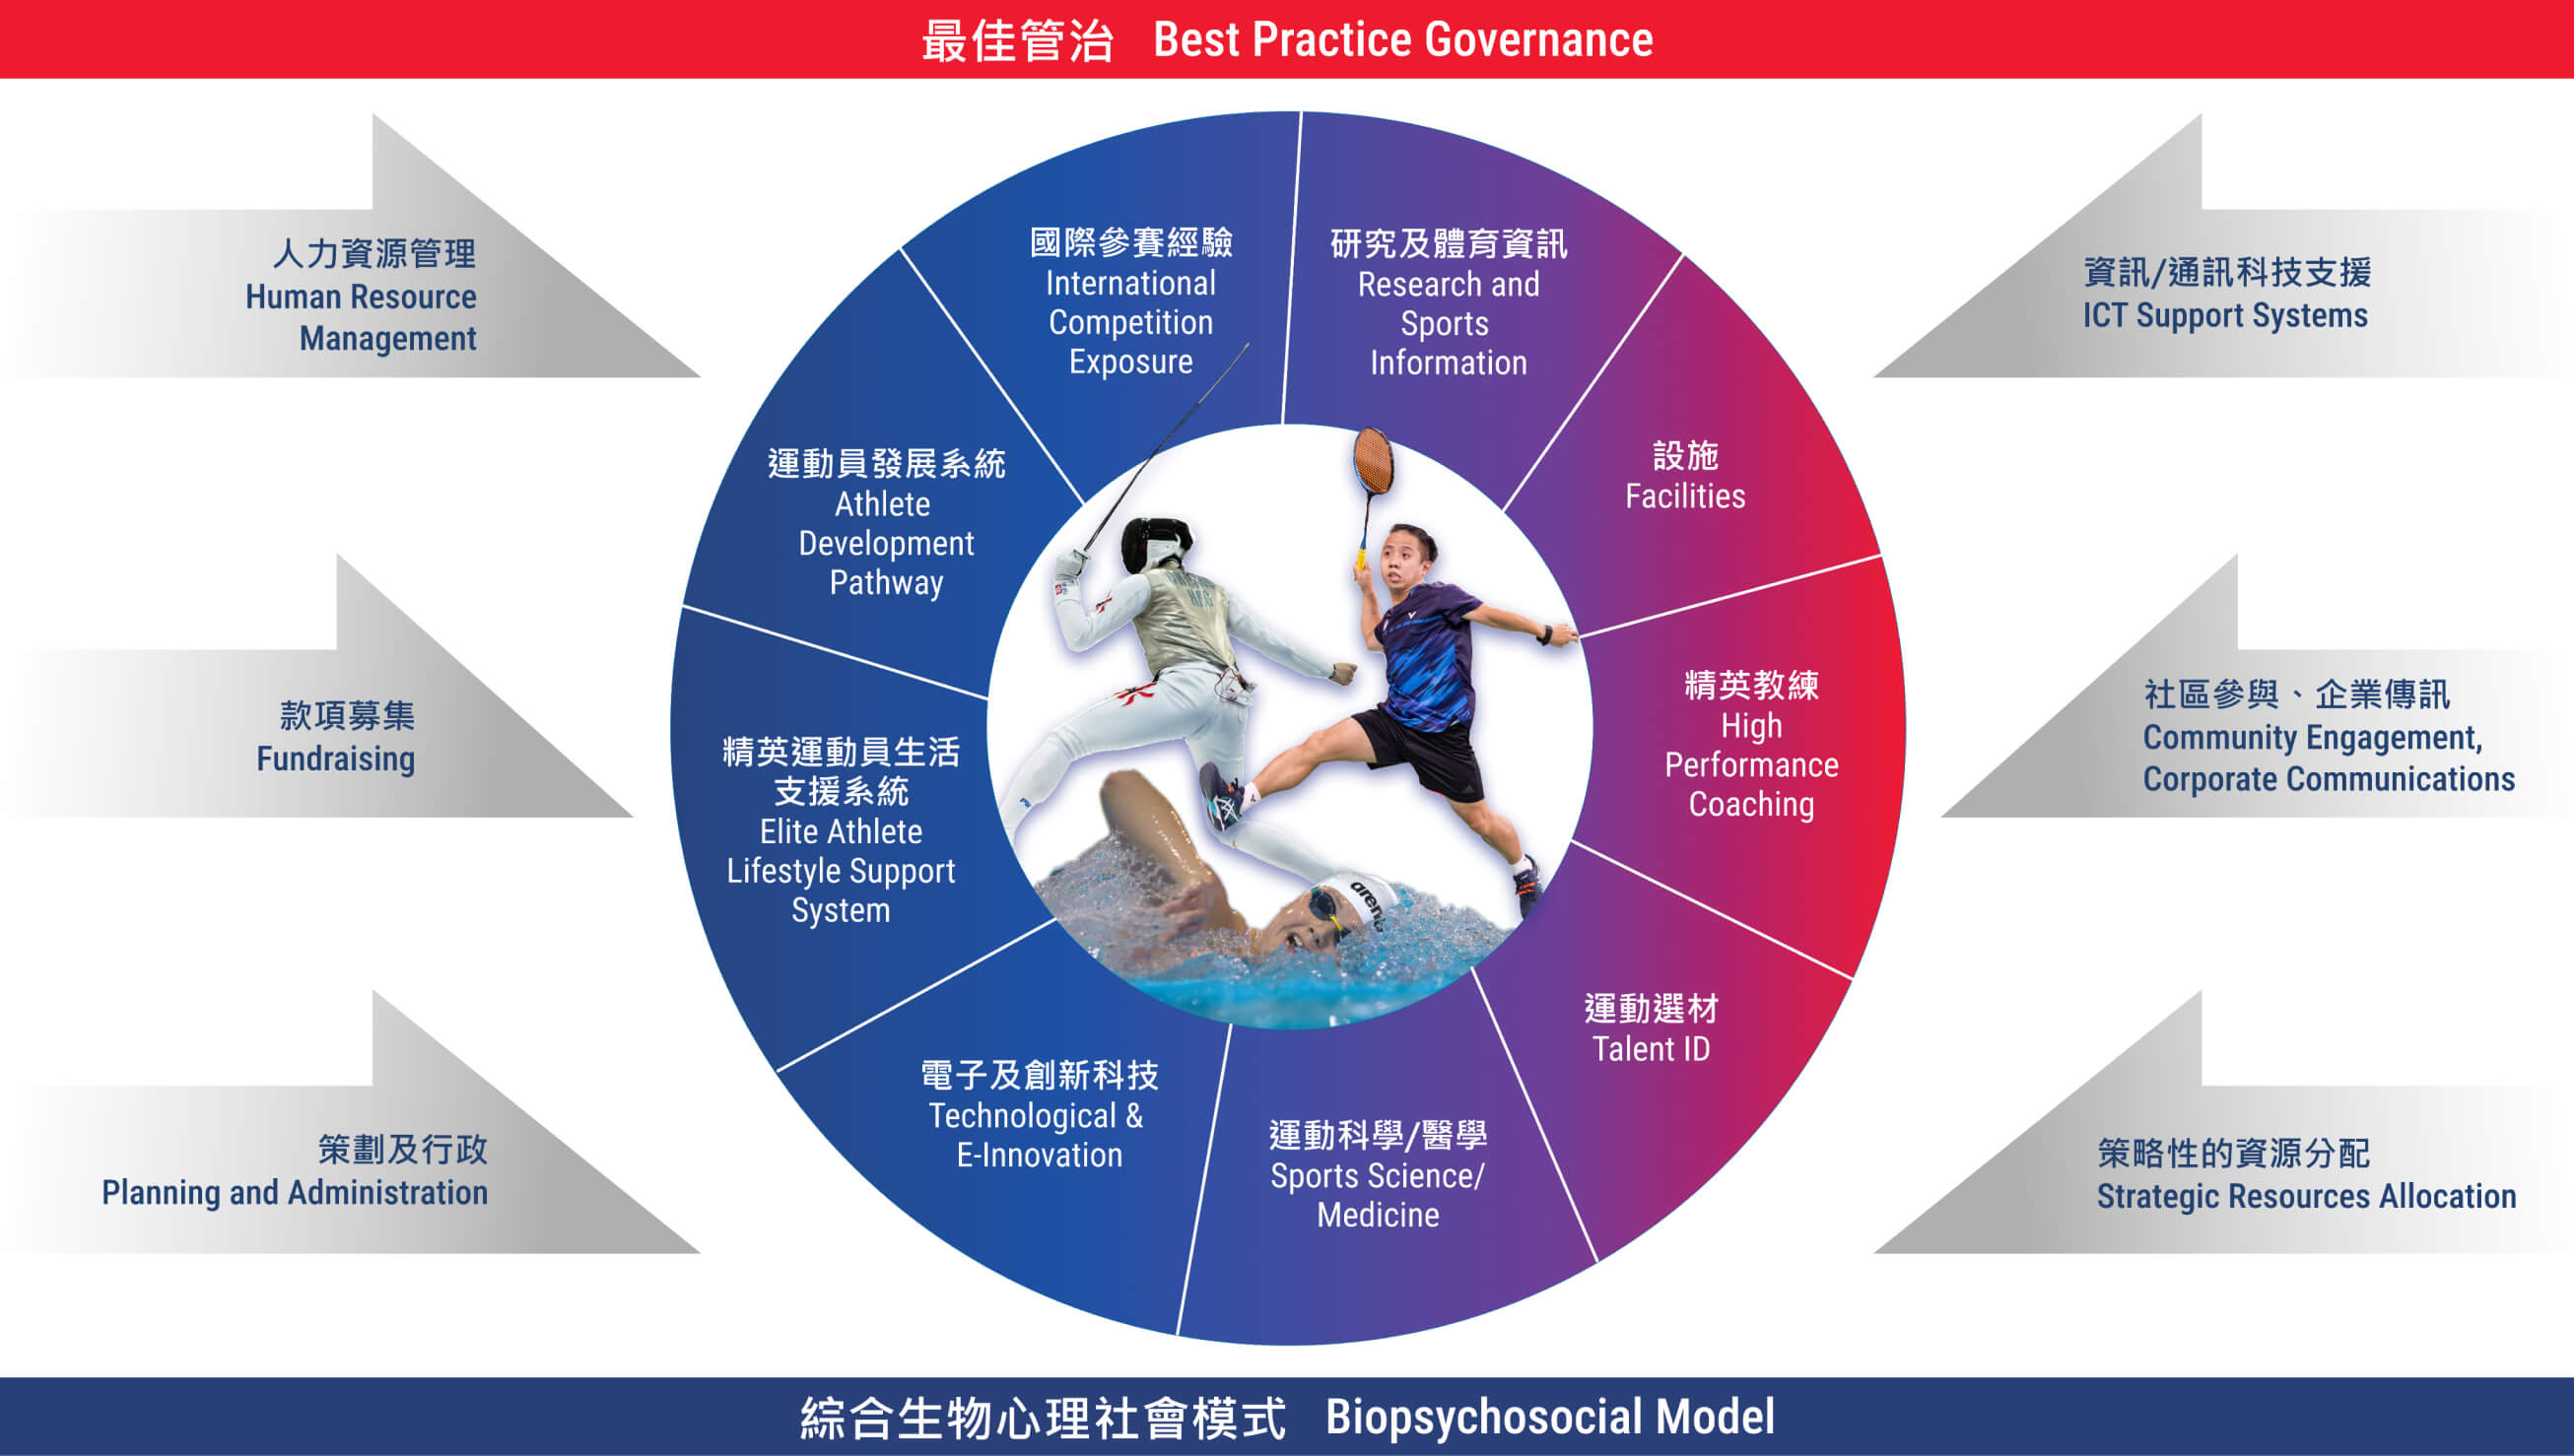 The critical success factors, which are directly related
                                            to the systematic development of elite athletes, are portrayed inside the circle,
                                            while support activities which are not directly related to individual athletes’
                                            development but which improve the provision and efficient functioning of the elite
                                            training system, are portrayed outside the circle.